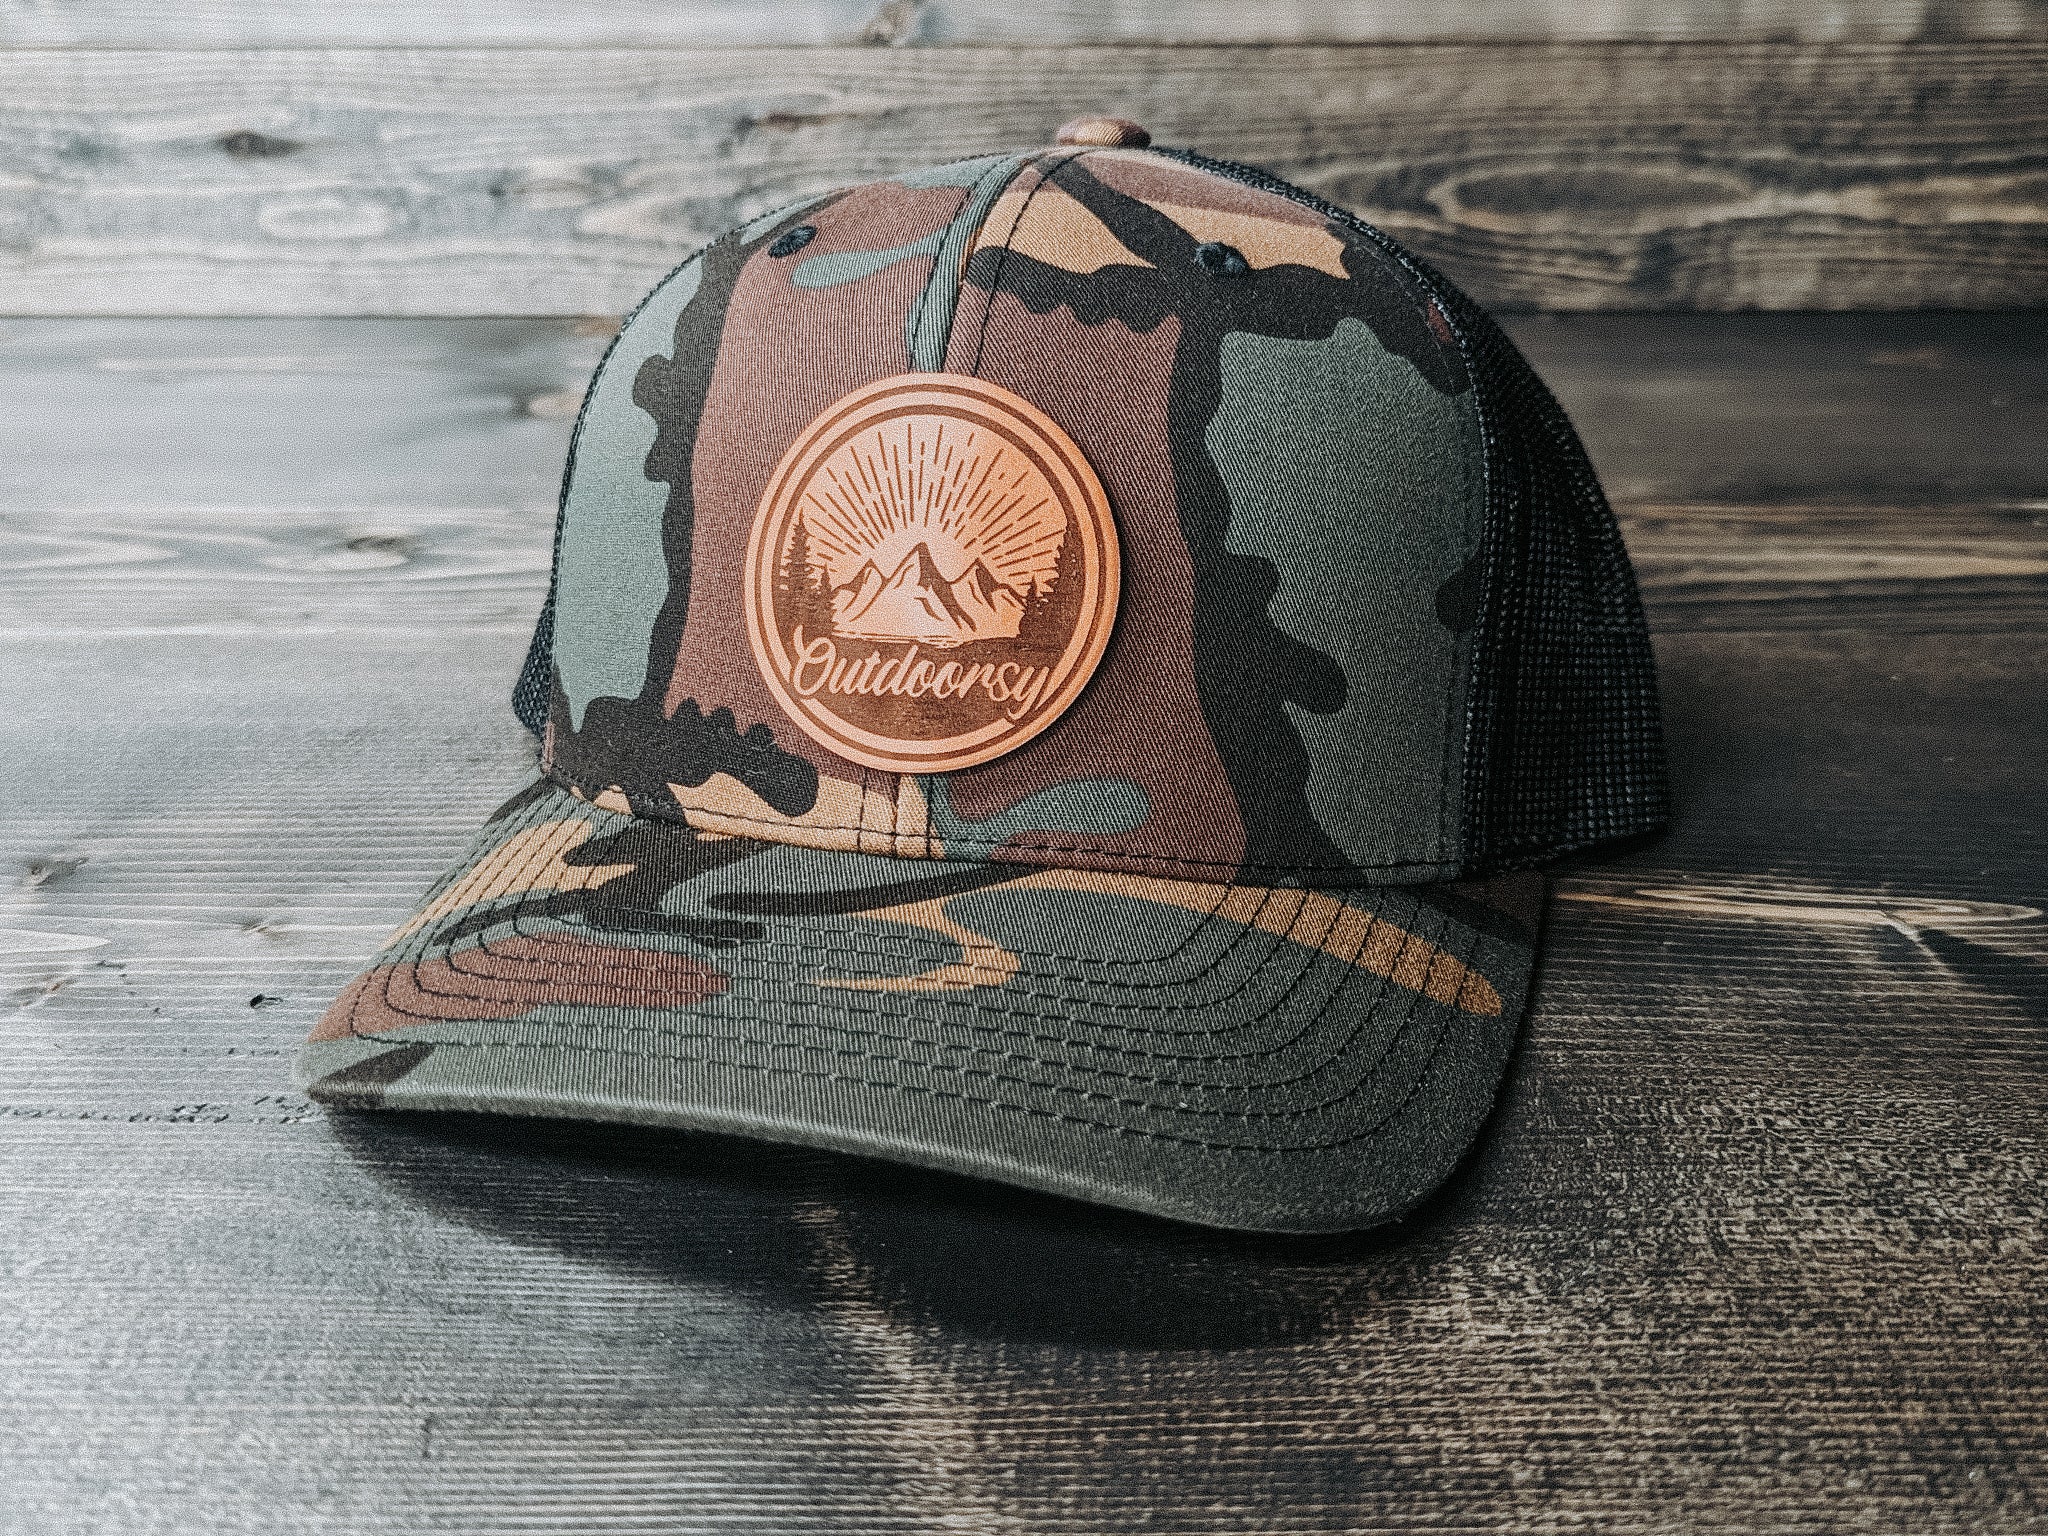 Pine Fly Leather Patch Hats - Wyo Dirt Customs Camo/Black